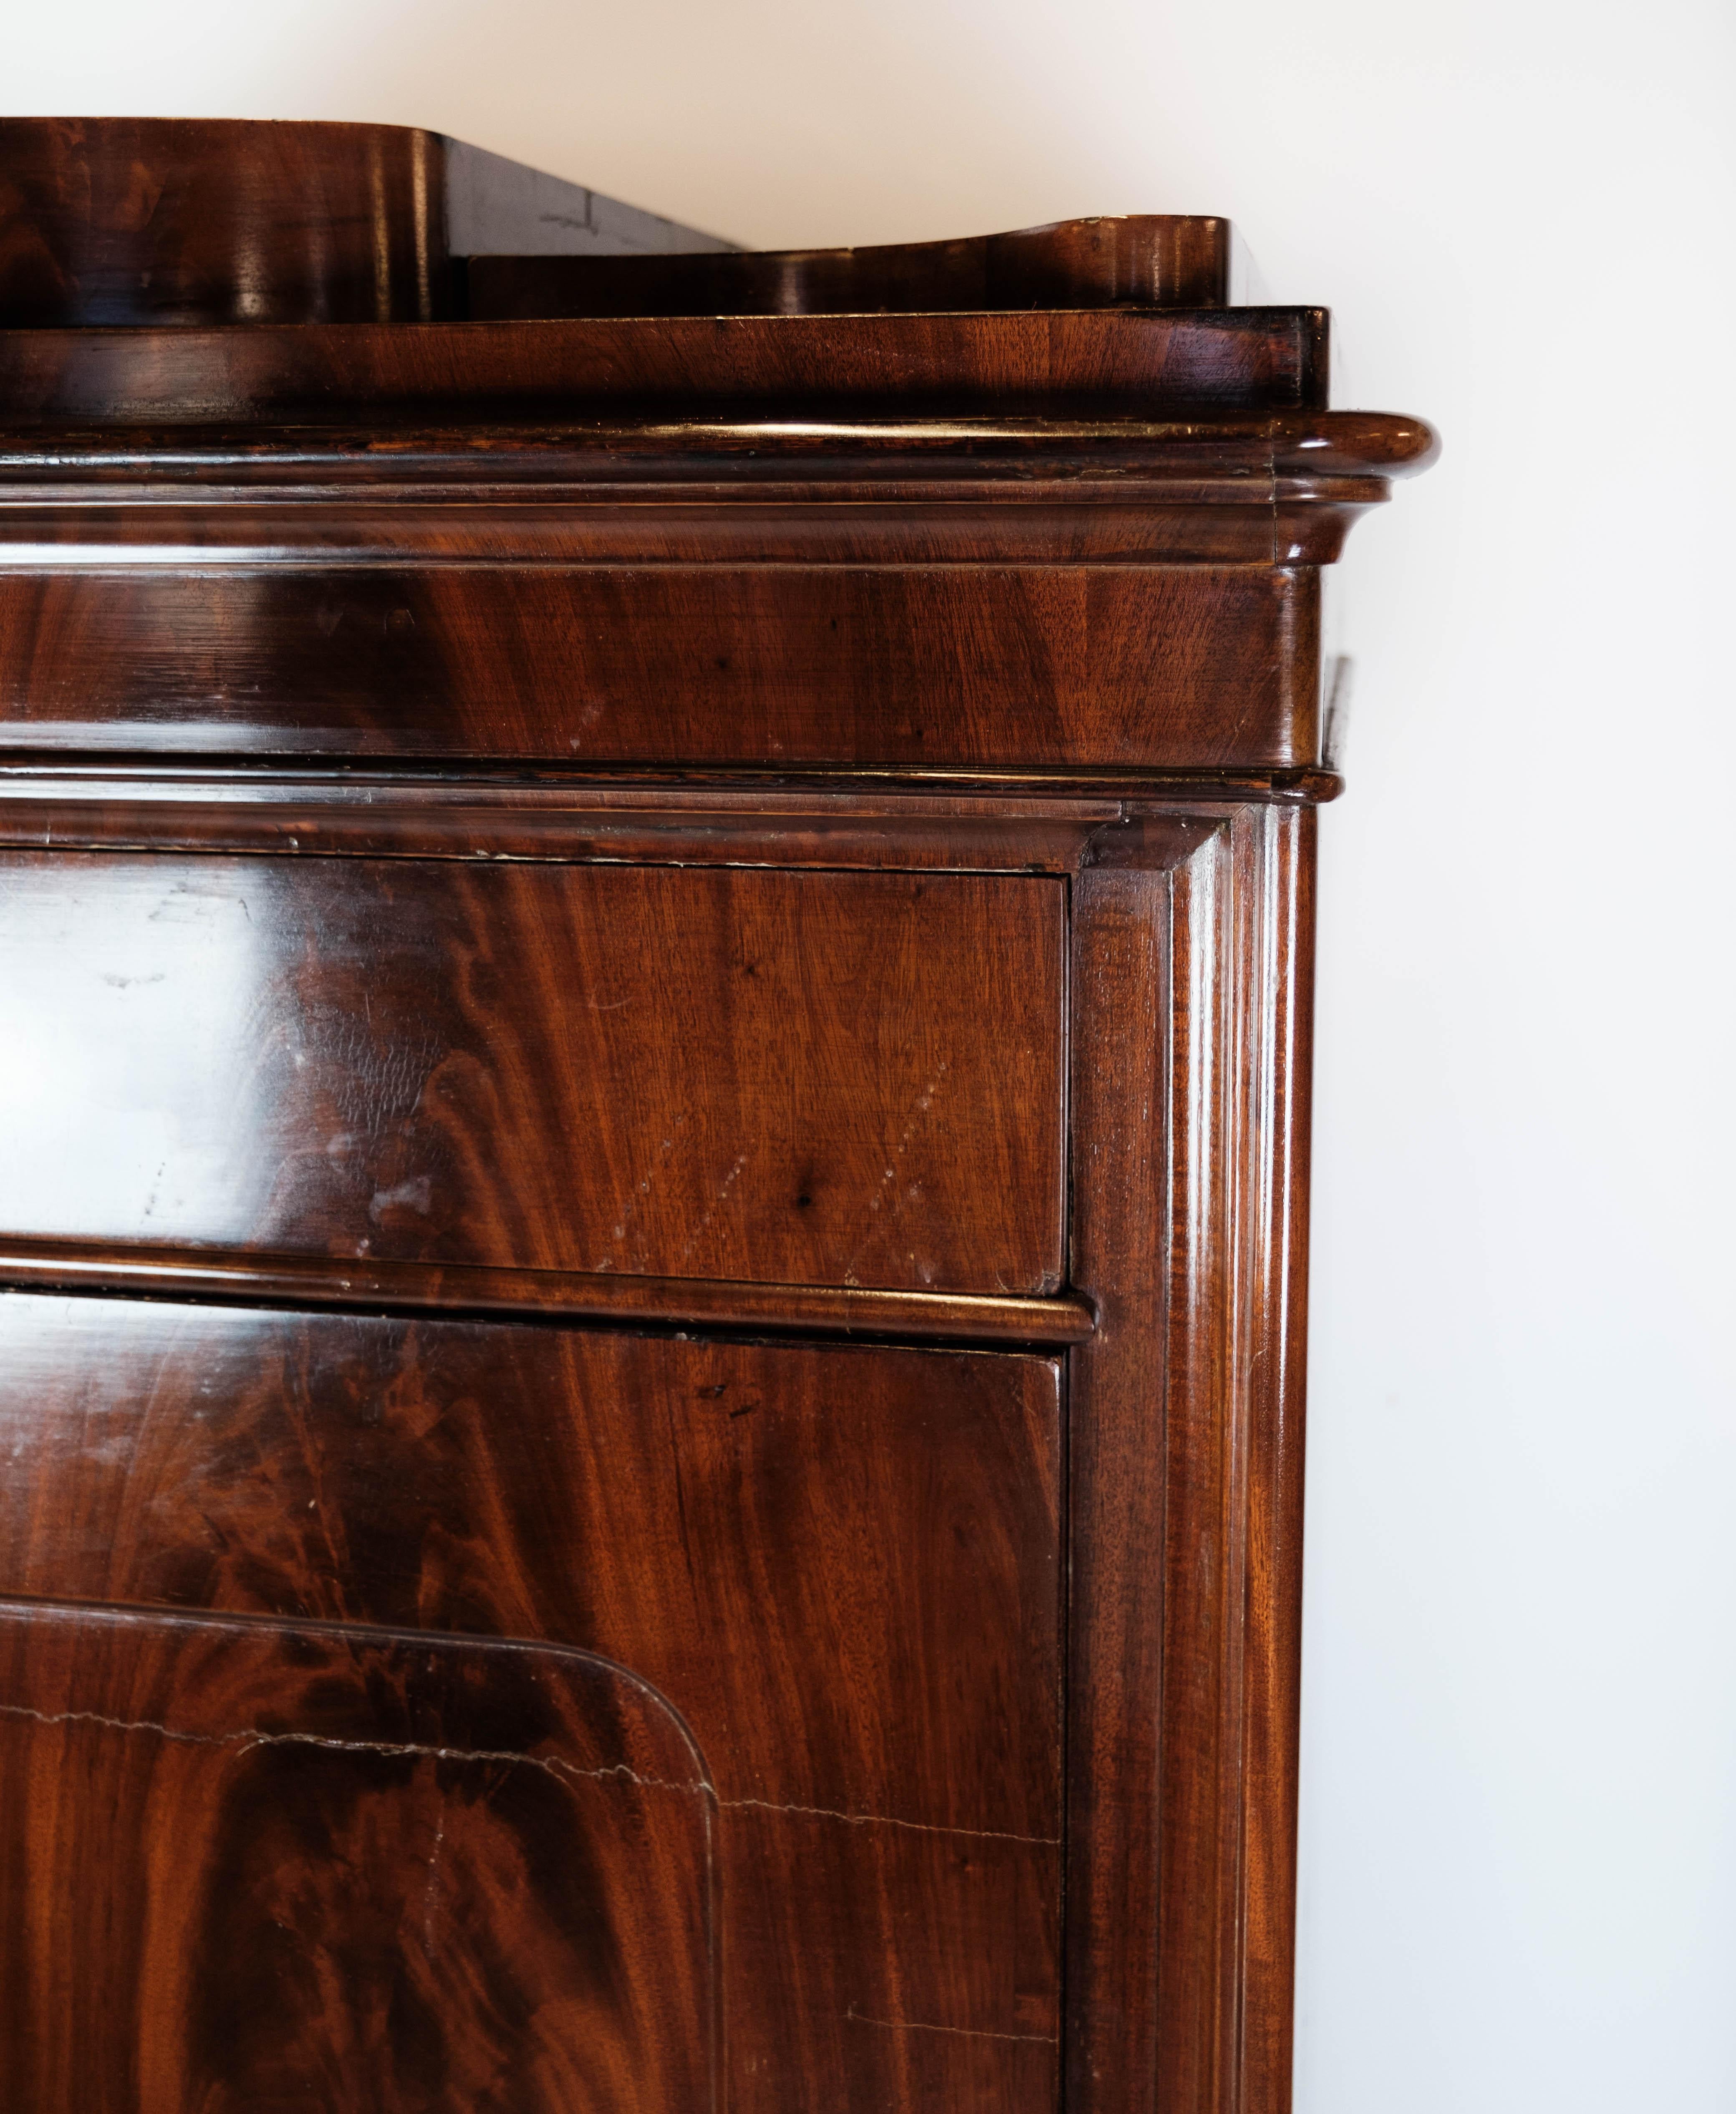 This exquisite secretary, crafted from rich mahogany with intricate inlaid wood details, showcases the elegance and craftsmanship of the 1840s. With its timeless design and impeccable antique condition, this piece exudes sophistication and